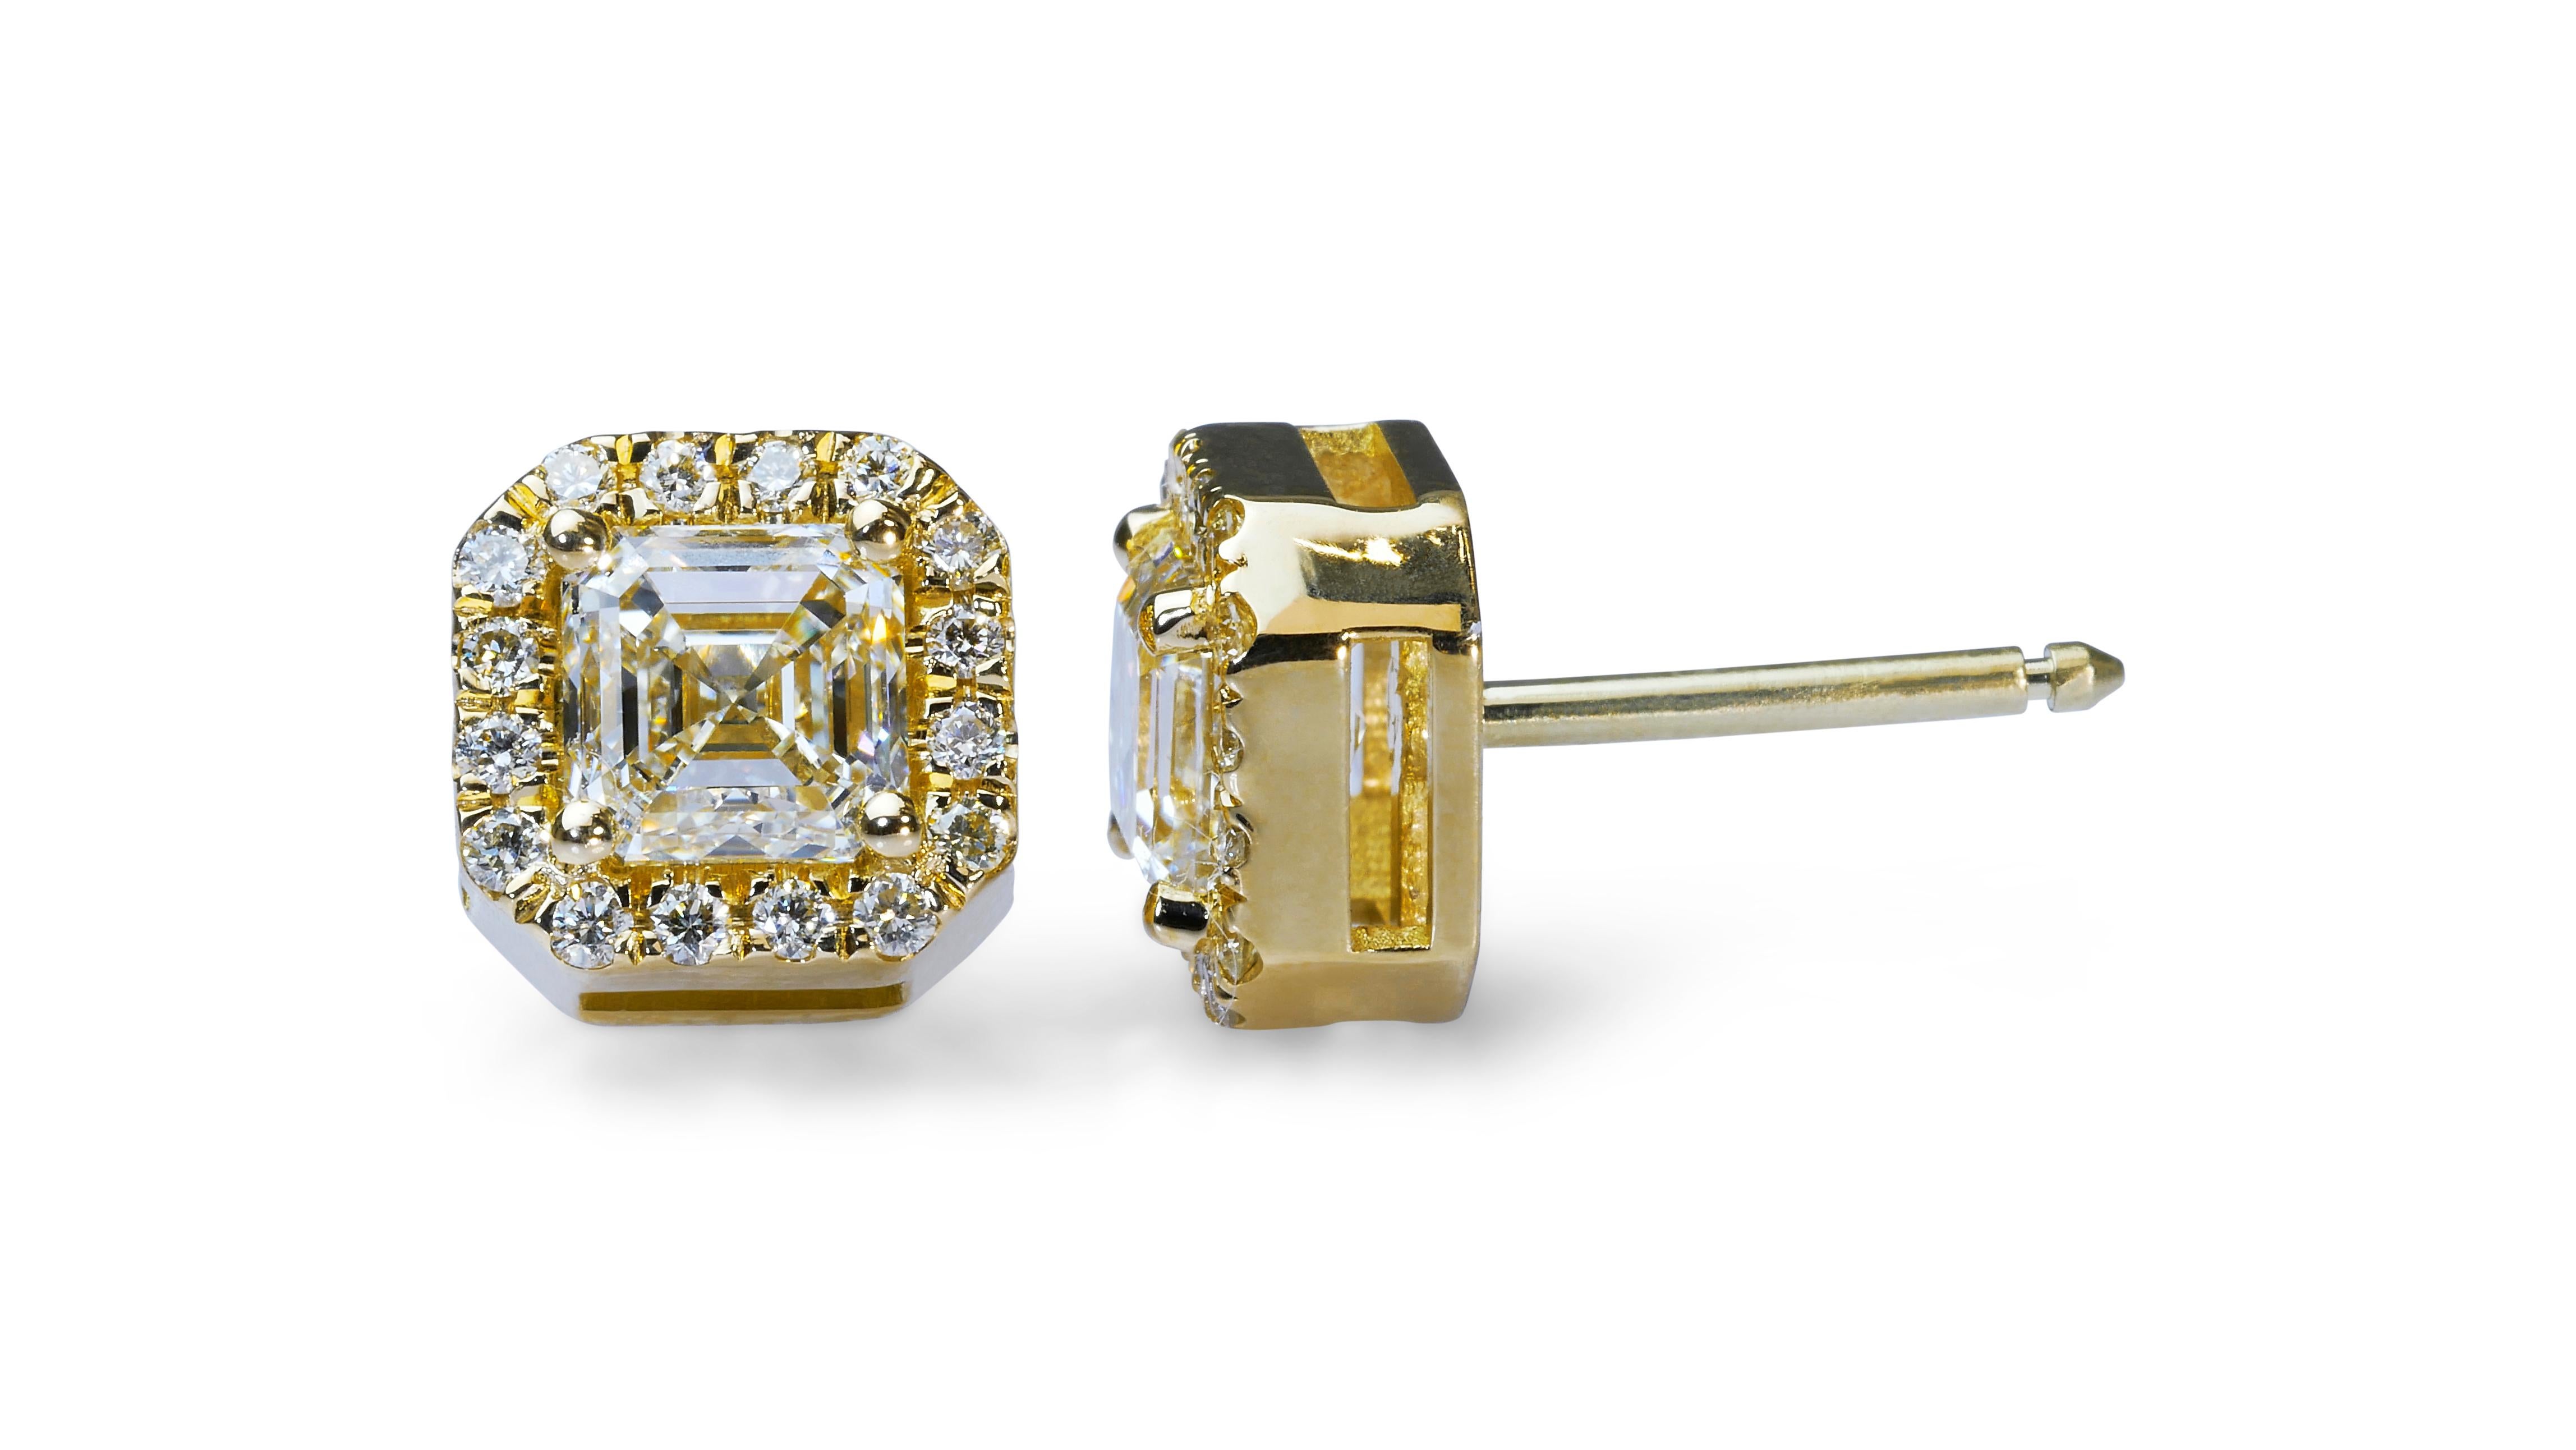 Magnificent 1.74ct Diamond Stud Earrings in 18k Yellow Gold - GIA Certified 

Experience the elegance of these beautiful diamond stud earrings, crafted from 18k yellow gold for a touch of luxury. The main stones feature two square diamonds, totaling